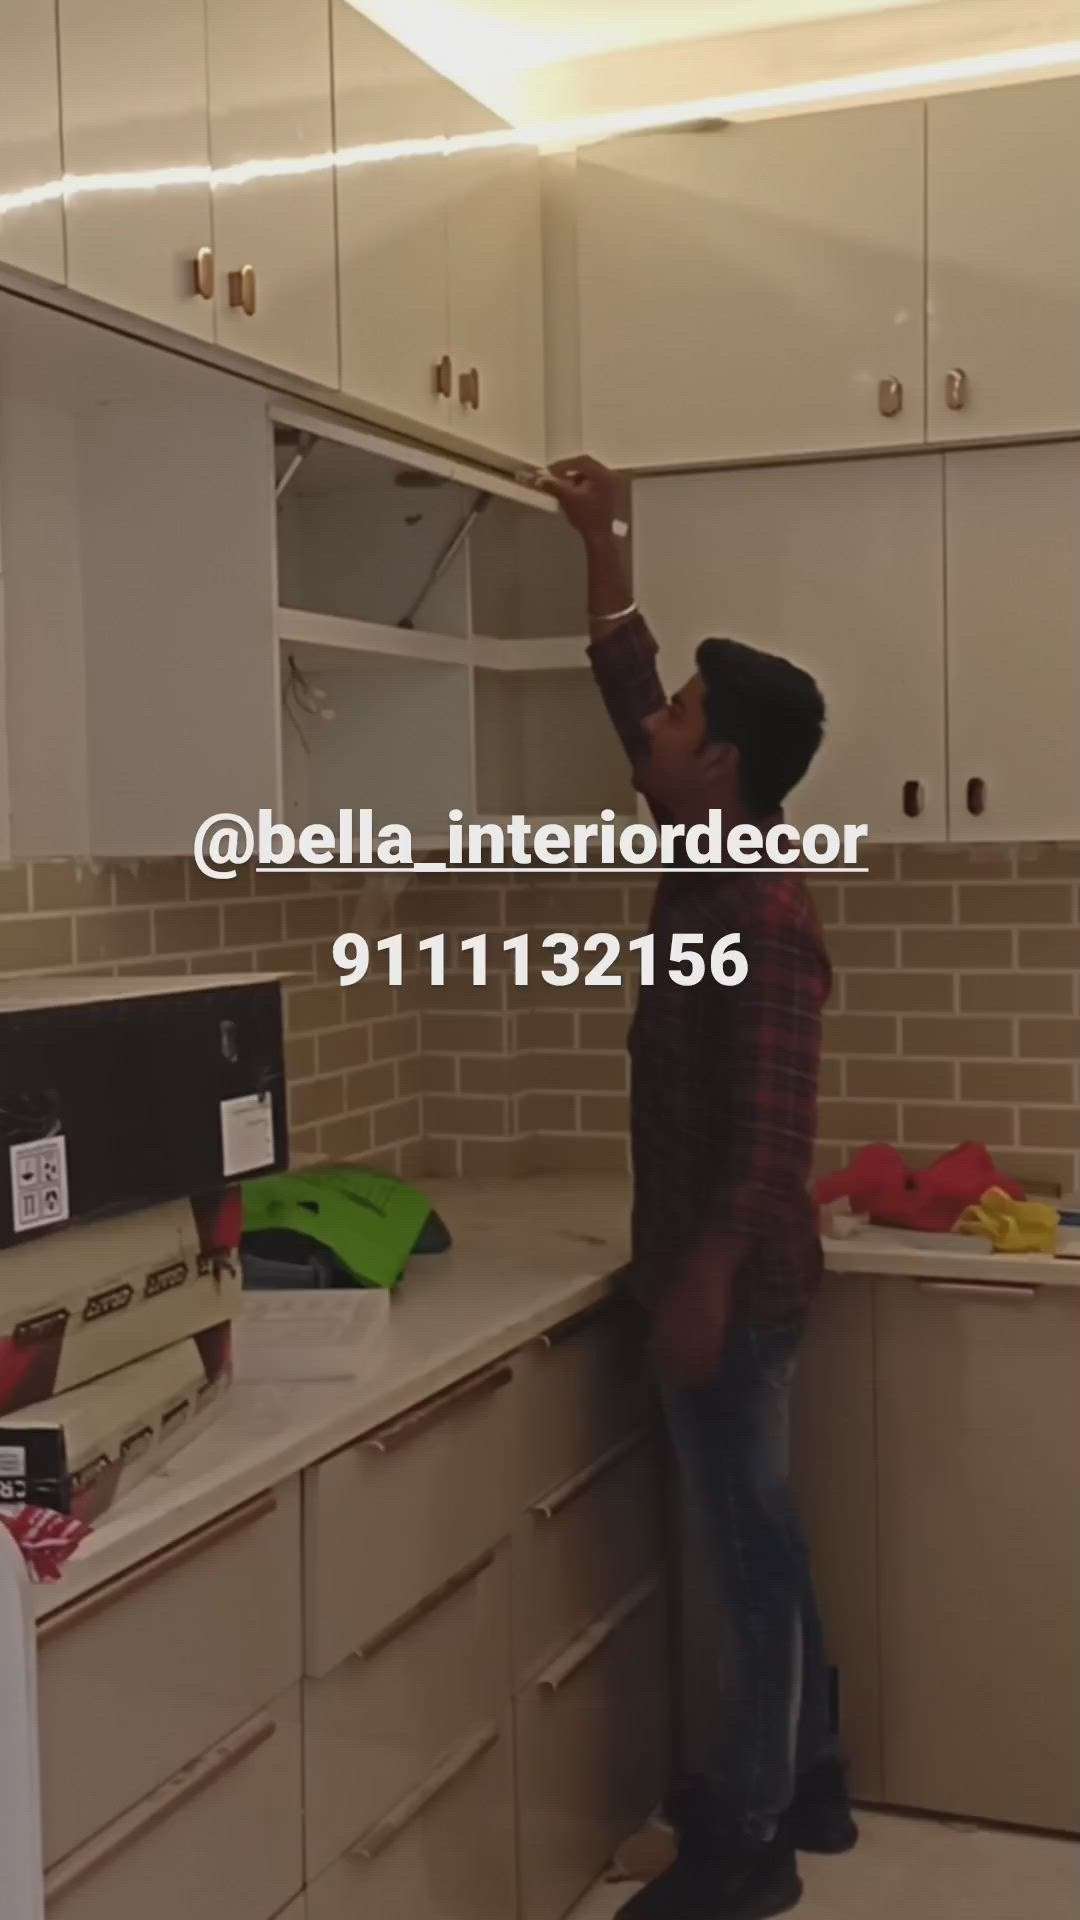 current site work 

work in progress


For house interiors contact

BELLA INTERIOR DECOR 
.
.
Make Your Dream House Come True With @bella_interiordecor 
.
.
• Your Budget ~ Their Brain 
• Themed Based Work
• BedRooms, Living Rooms, Study, Kitchen, Offices, Showrooms & More! 
.
.
Contact - 9111132156
.
Address :- jangirwala square Indore m.p. 

Credits: @bella_interiordecor

#interiordesign #design #interior #homedecor
#architecture #home #decor #interiors
#homedesign #art #interiordesigner #furniture
#decoration #photo #designer #interiorstyling
#interiordecor #homesweethome 
#inspiration #furnituredesign #livingroom #interiordecorating   #BedroomDecor  #HouseDesigns  #houseinterior 
#kitchendesign #foryou #photographylover #explorepage✨ #explorepage #viralposts  #koloamaterials  #koloviral  #kolopost